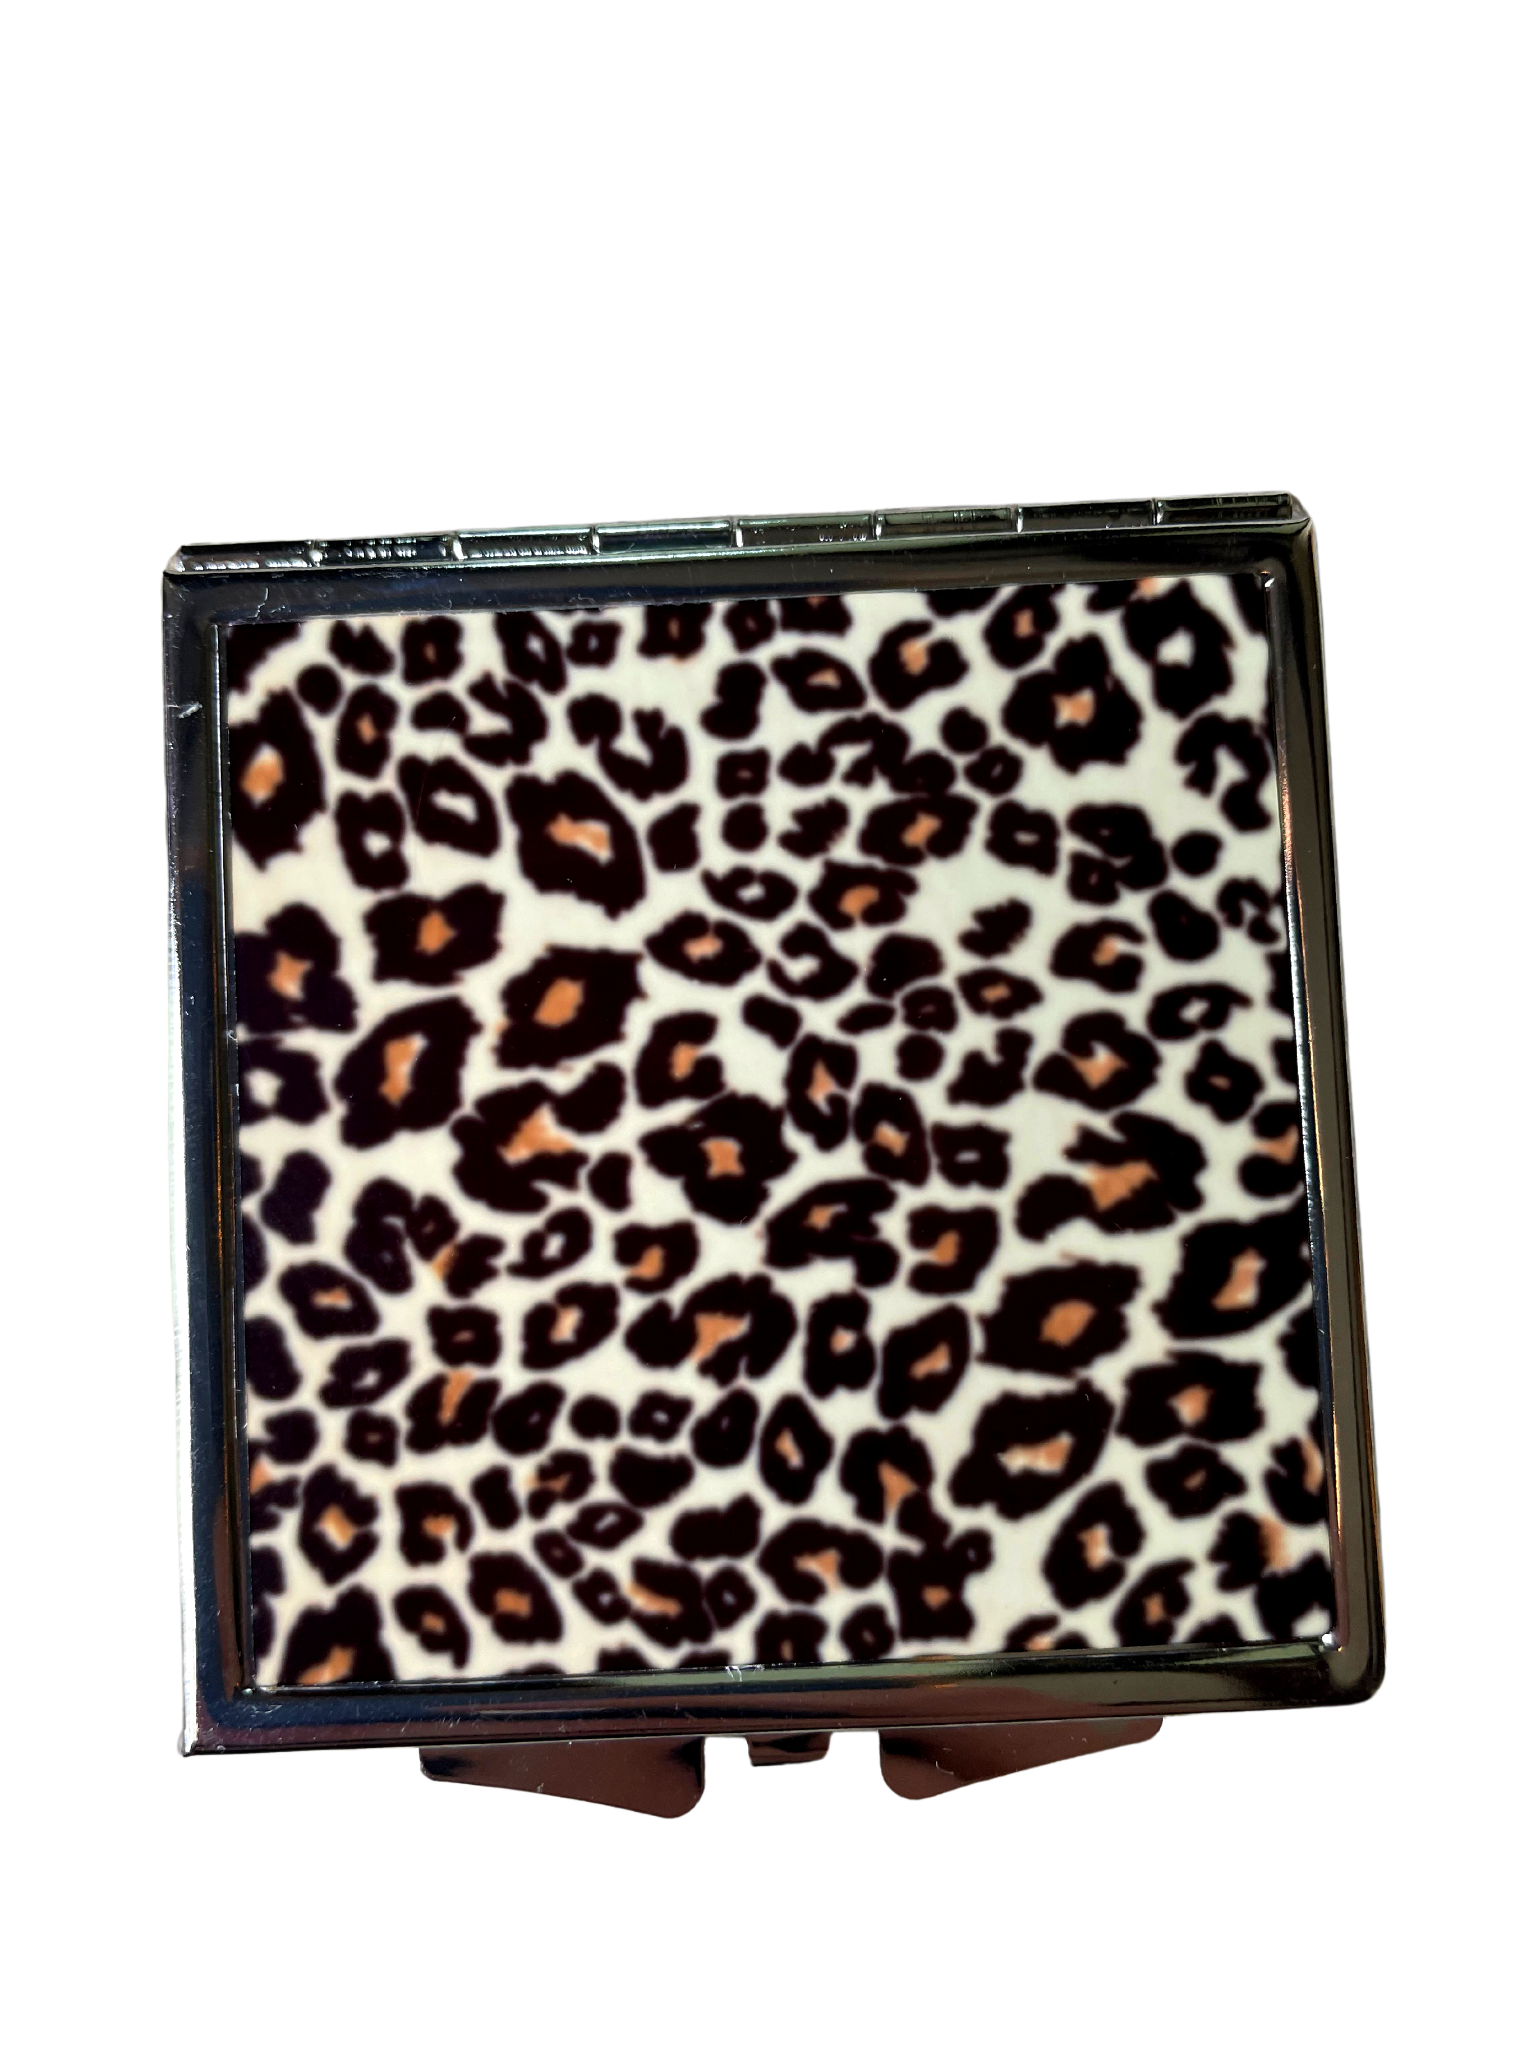 *Compact mirror with leopard print